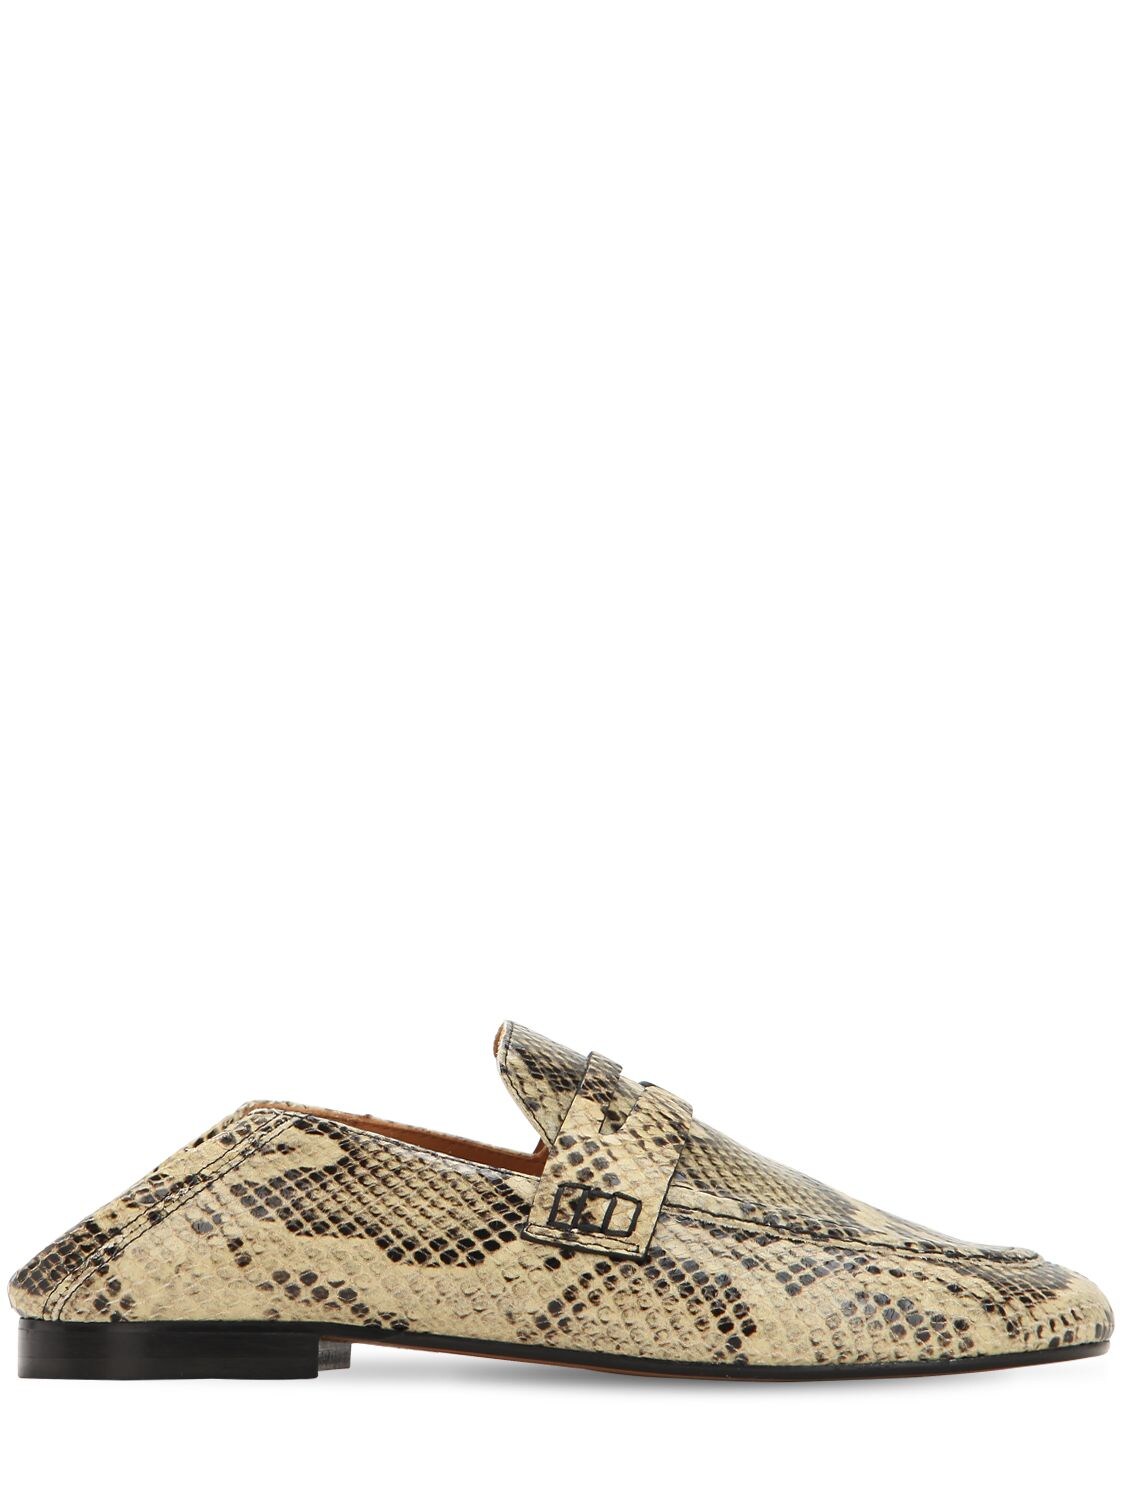 ISABEL MARANT 10MM FEZZY PYTHON PRINTED PENNY LOAFERS,69IE1C003-MJNOTA2